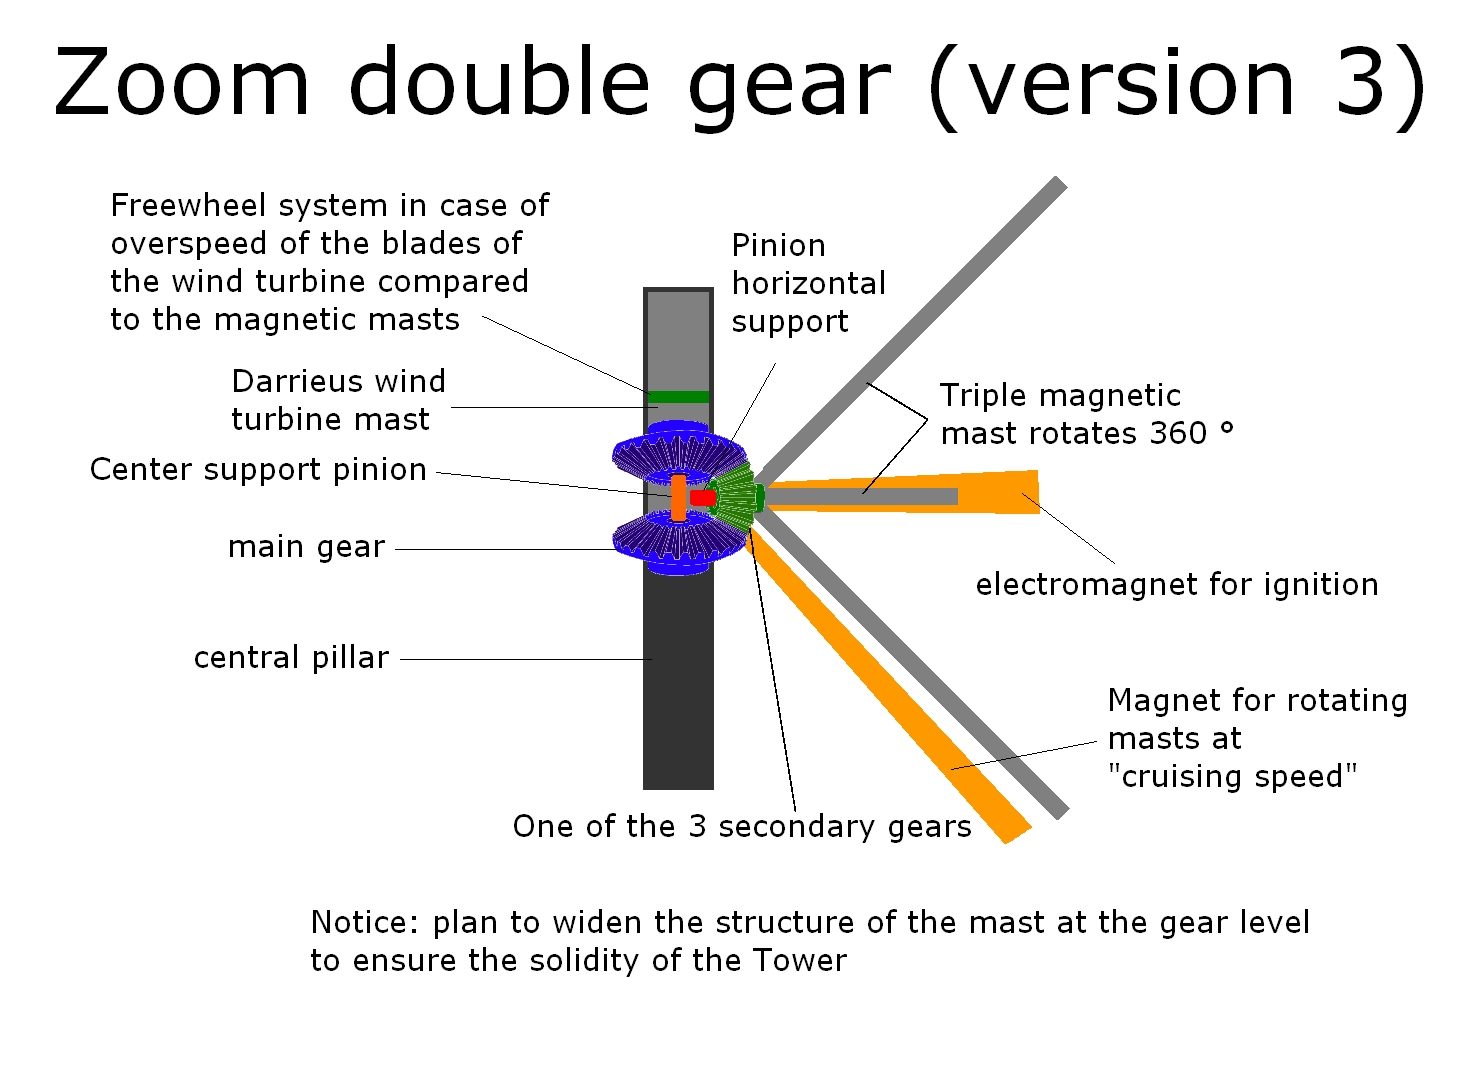 Zoom on the Double Gear Mechanism (version 3)